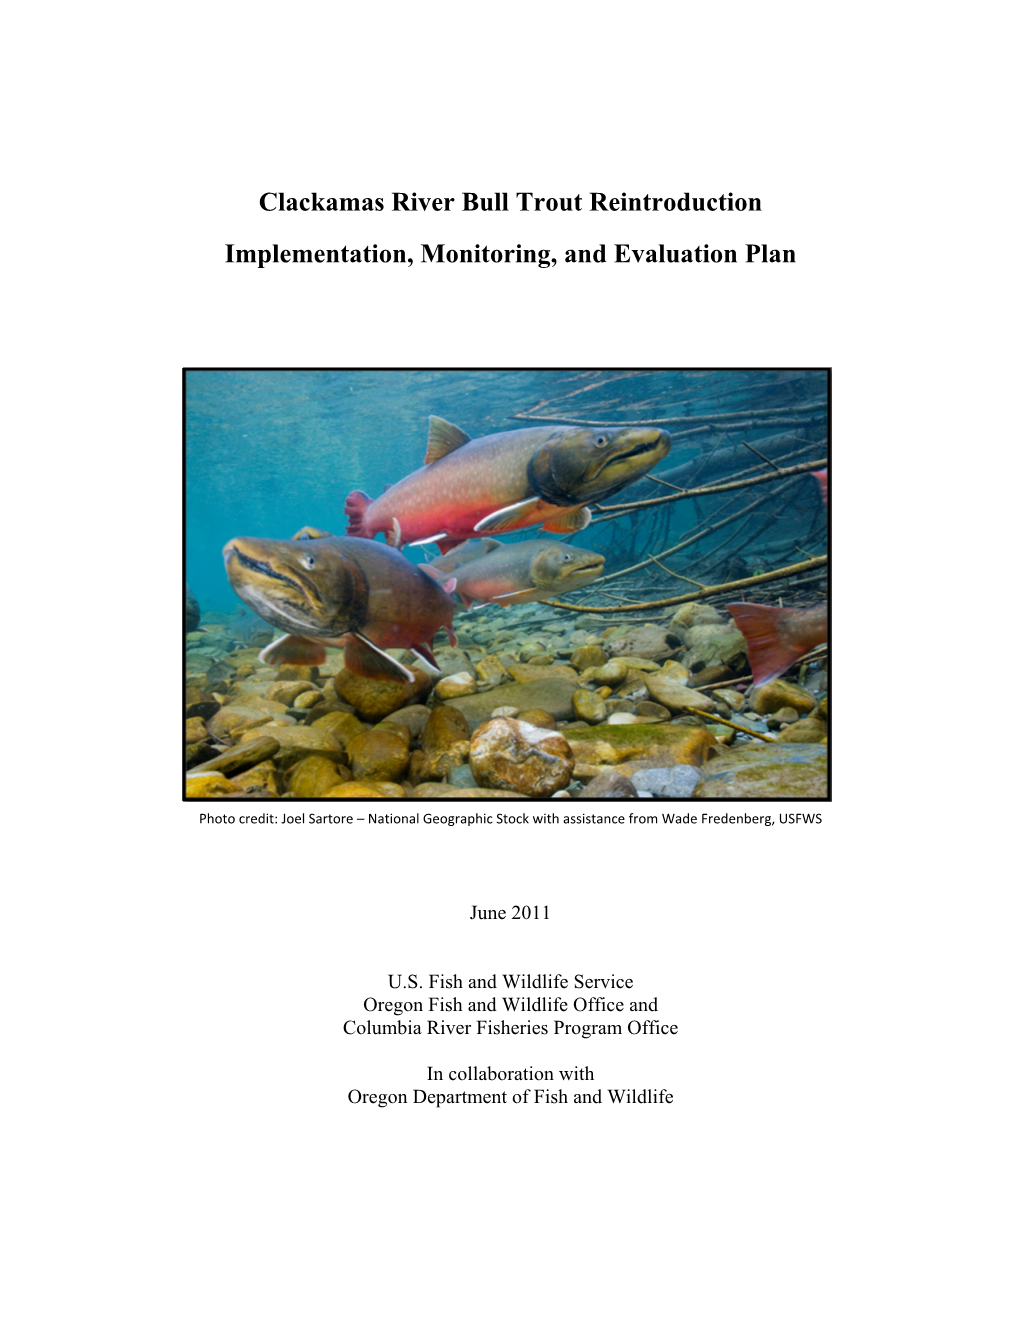 Clackamas River Bull Trout Reintroduction Implementation, Monitoring, and Evaluation Plan